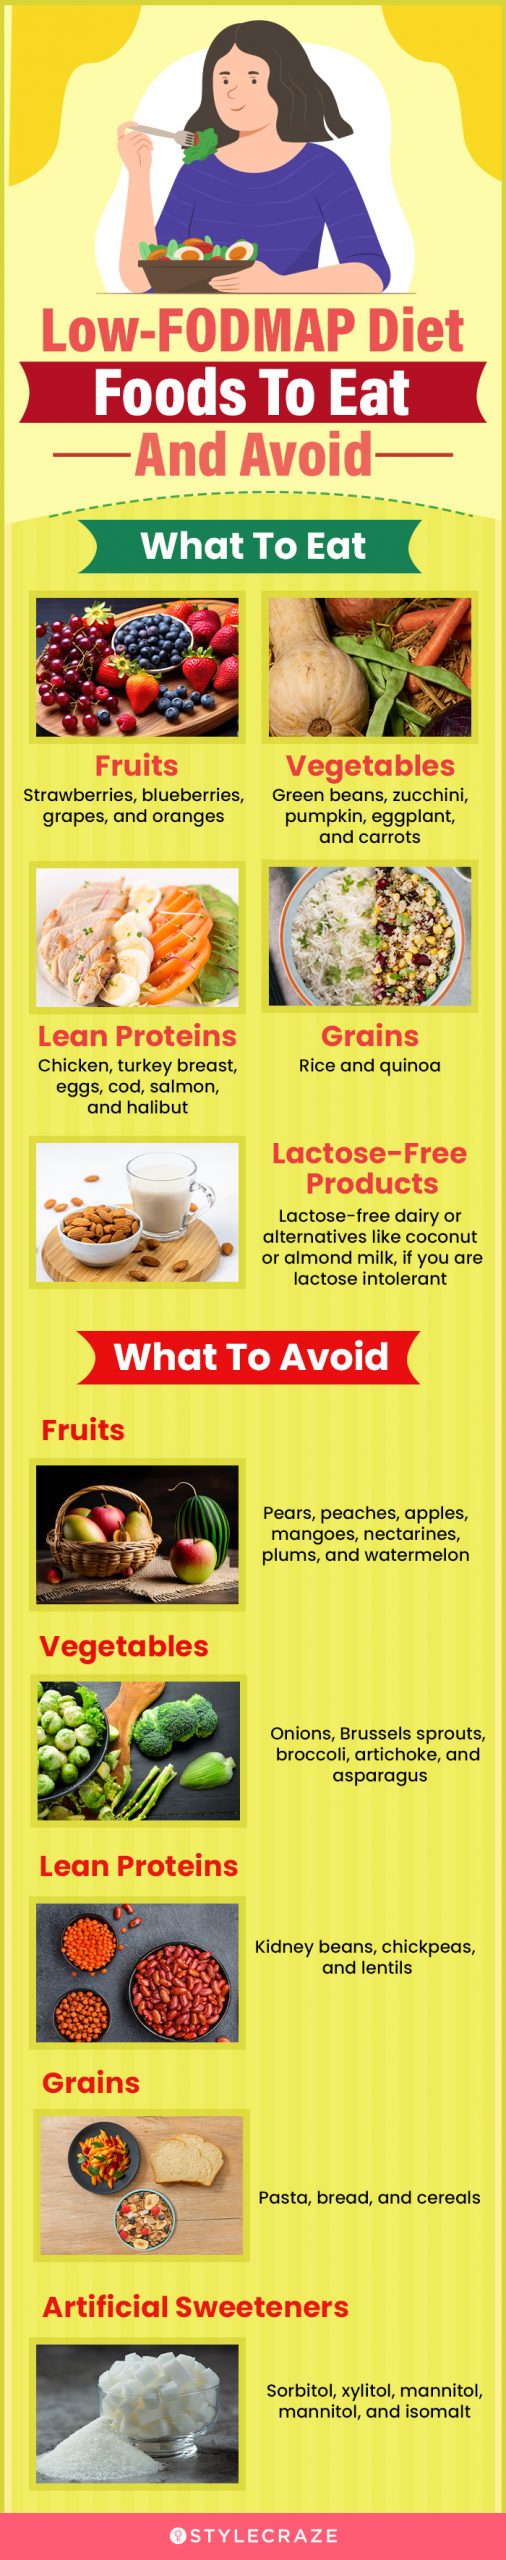 low fodmap diet+foods to eat and avoid (infographic)